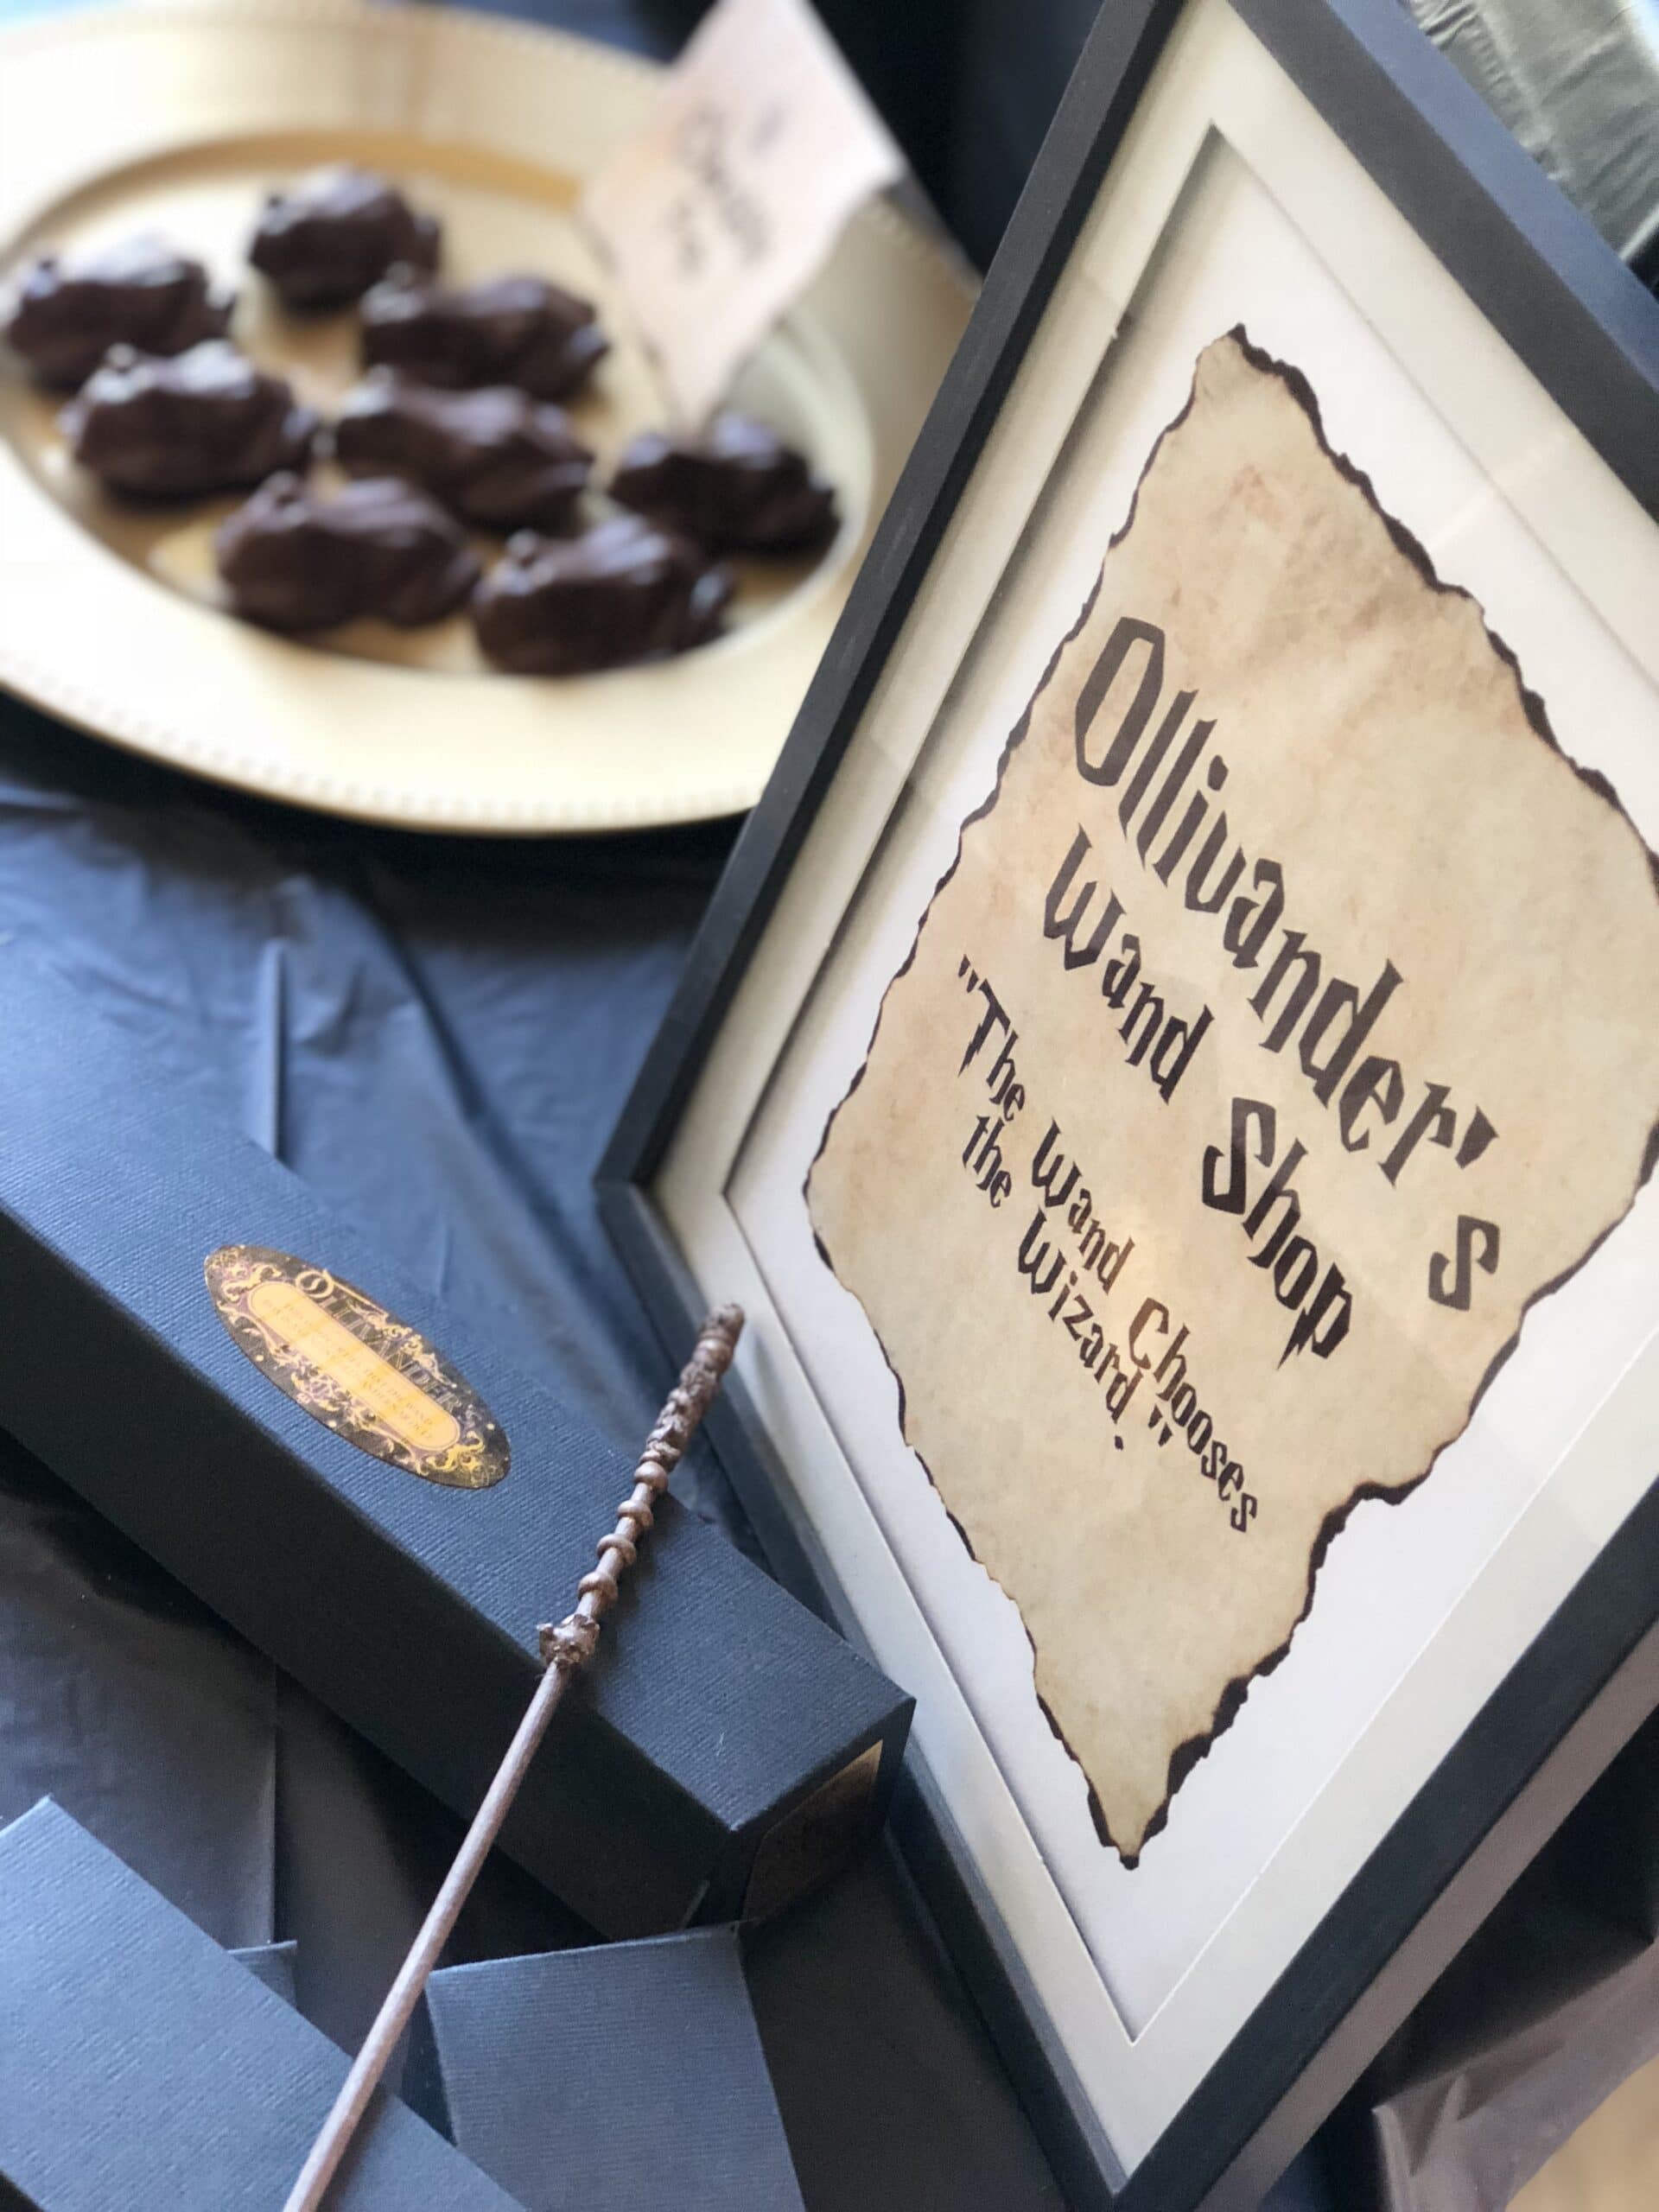 Let’s Craft; Octane hosts virtual wand crafting class